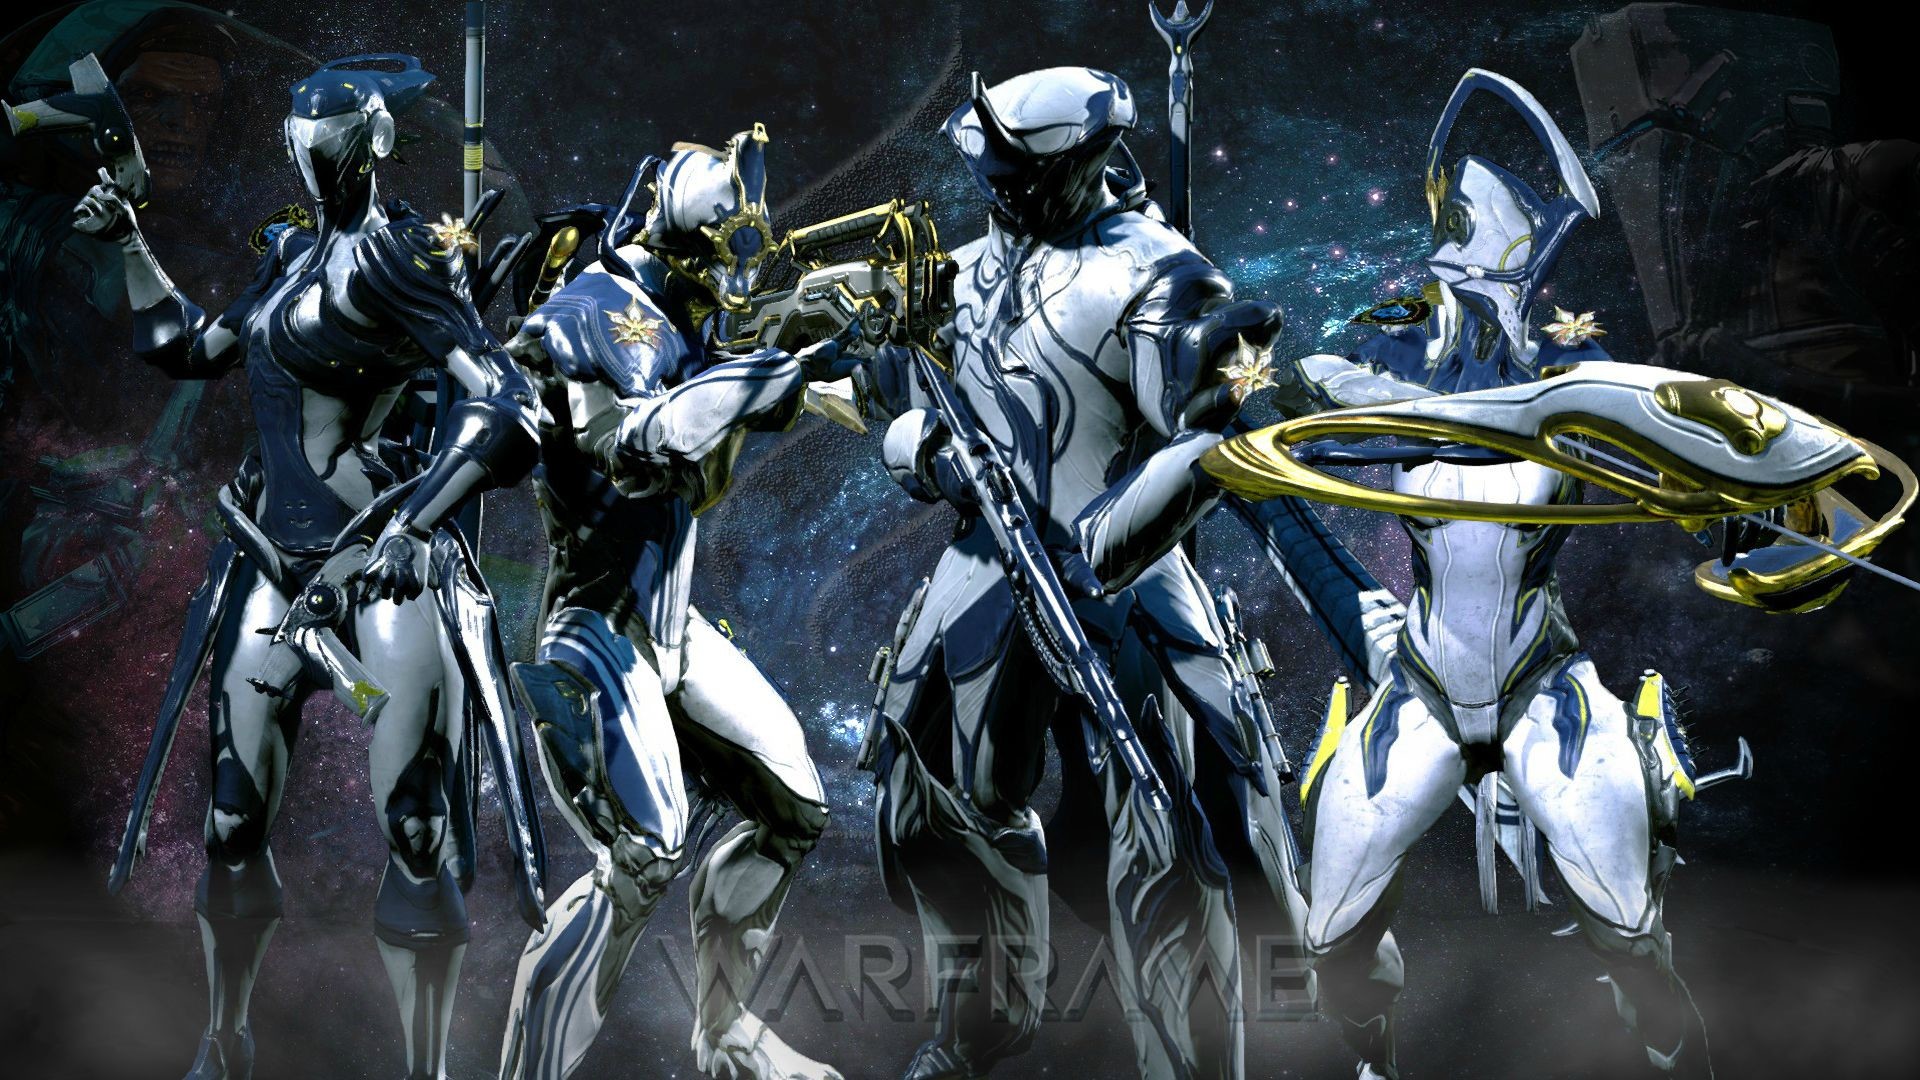 1920x1080 87 Warframe HD Wallpapers Backgrounds Wallpaper Abyss - HD Wallpapers